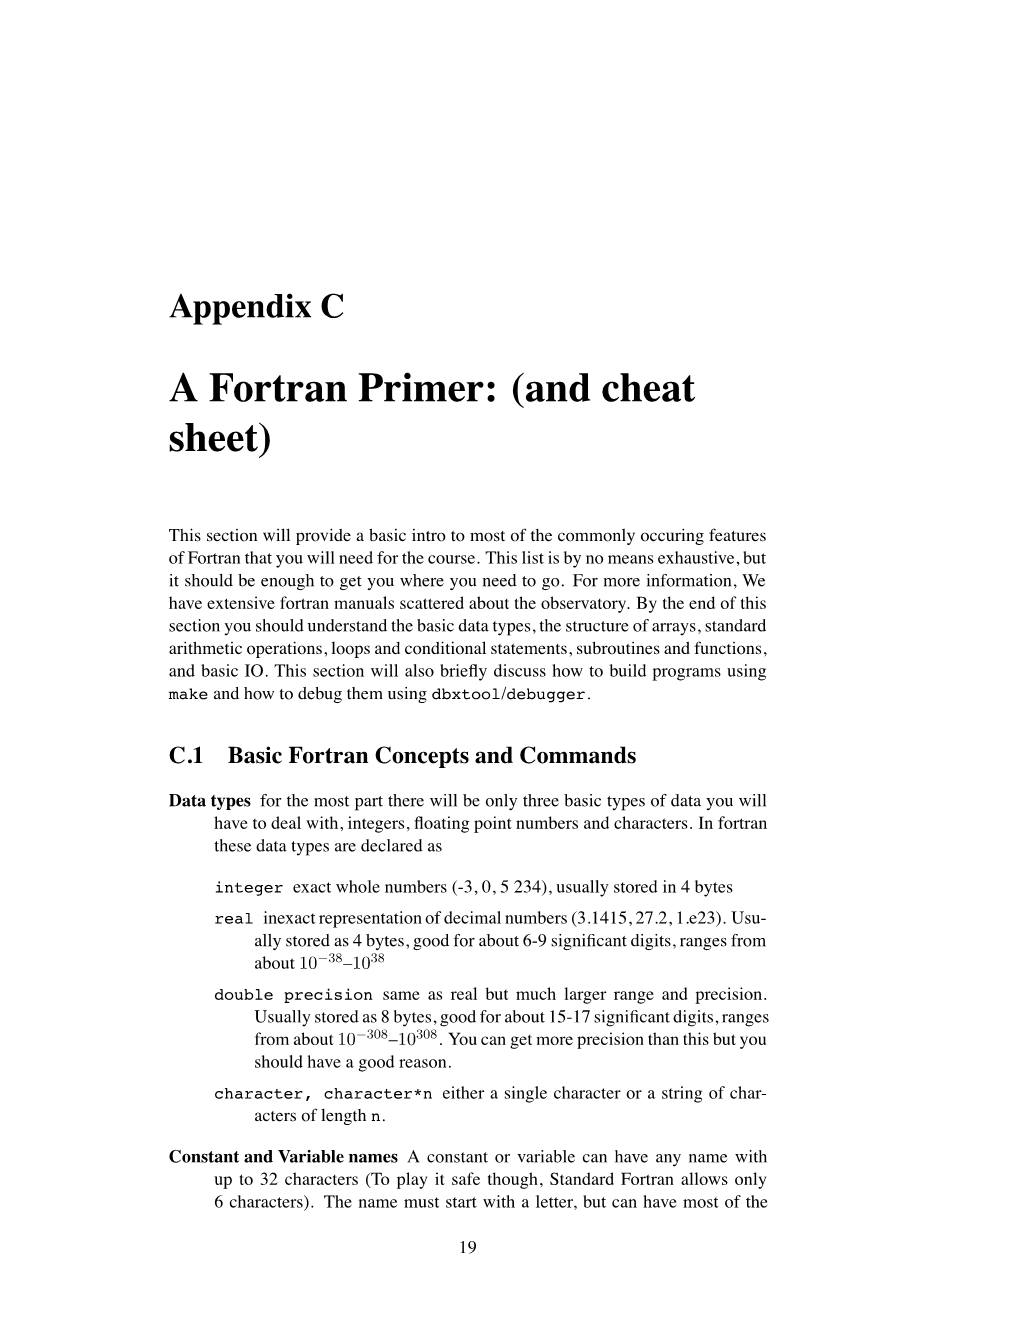 A Fortran Primer: (And Cheat Sheet)